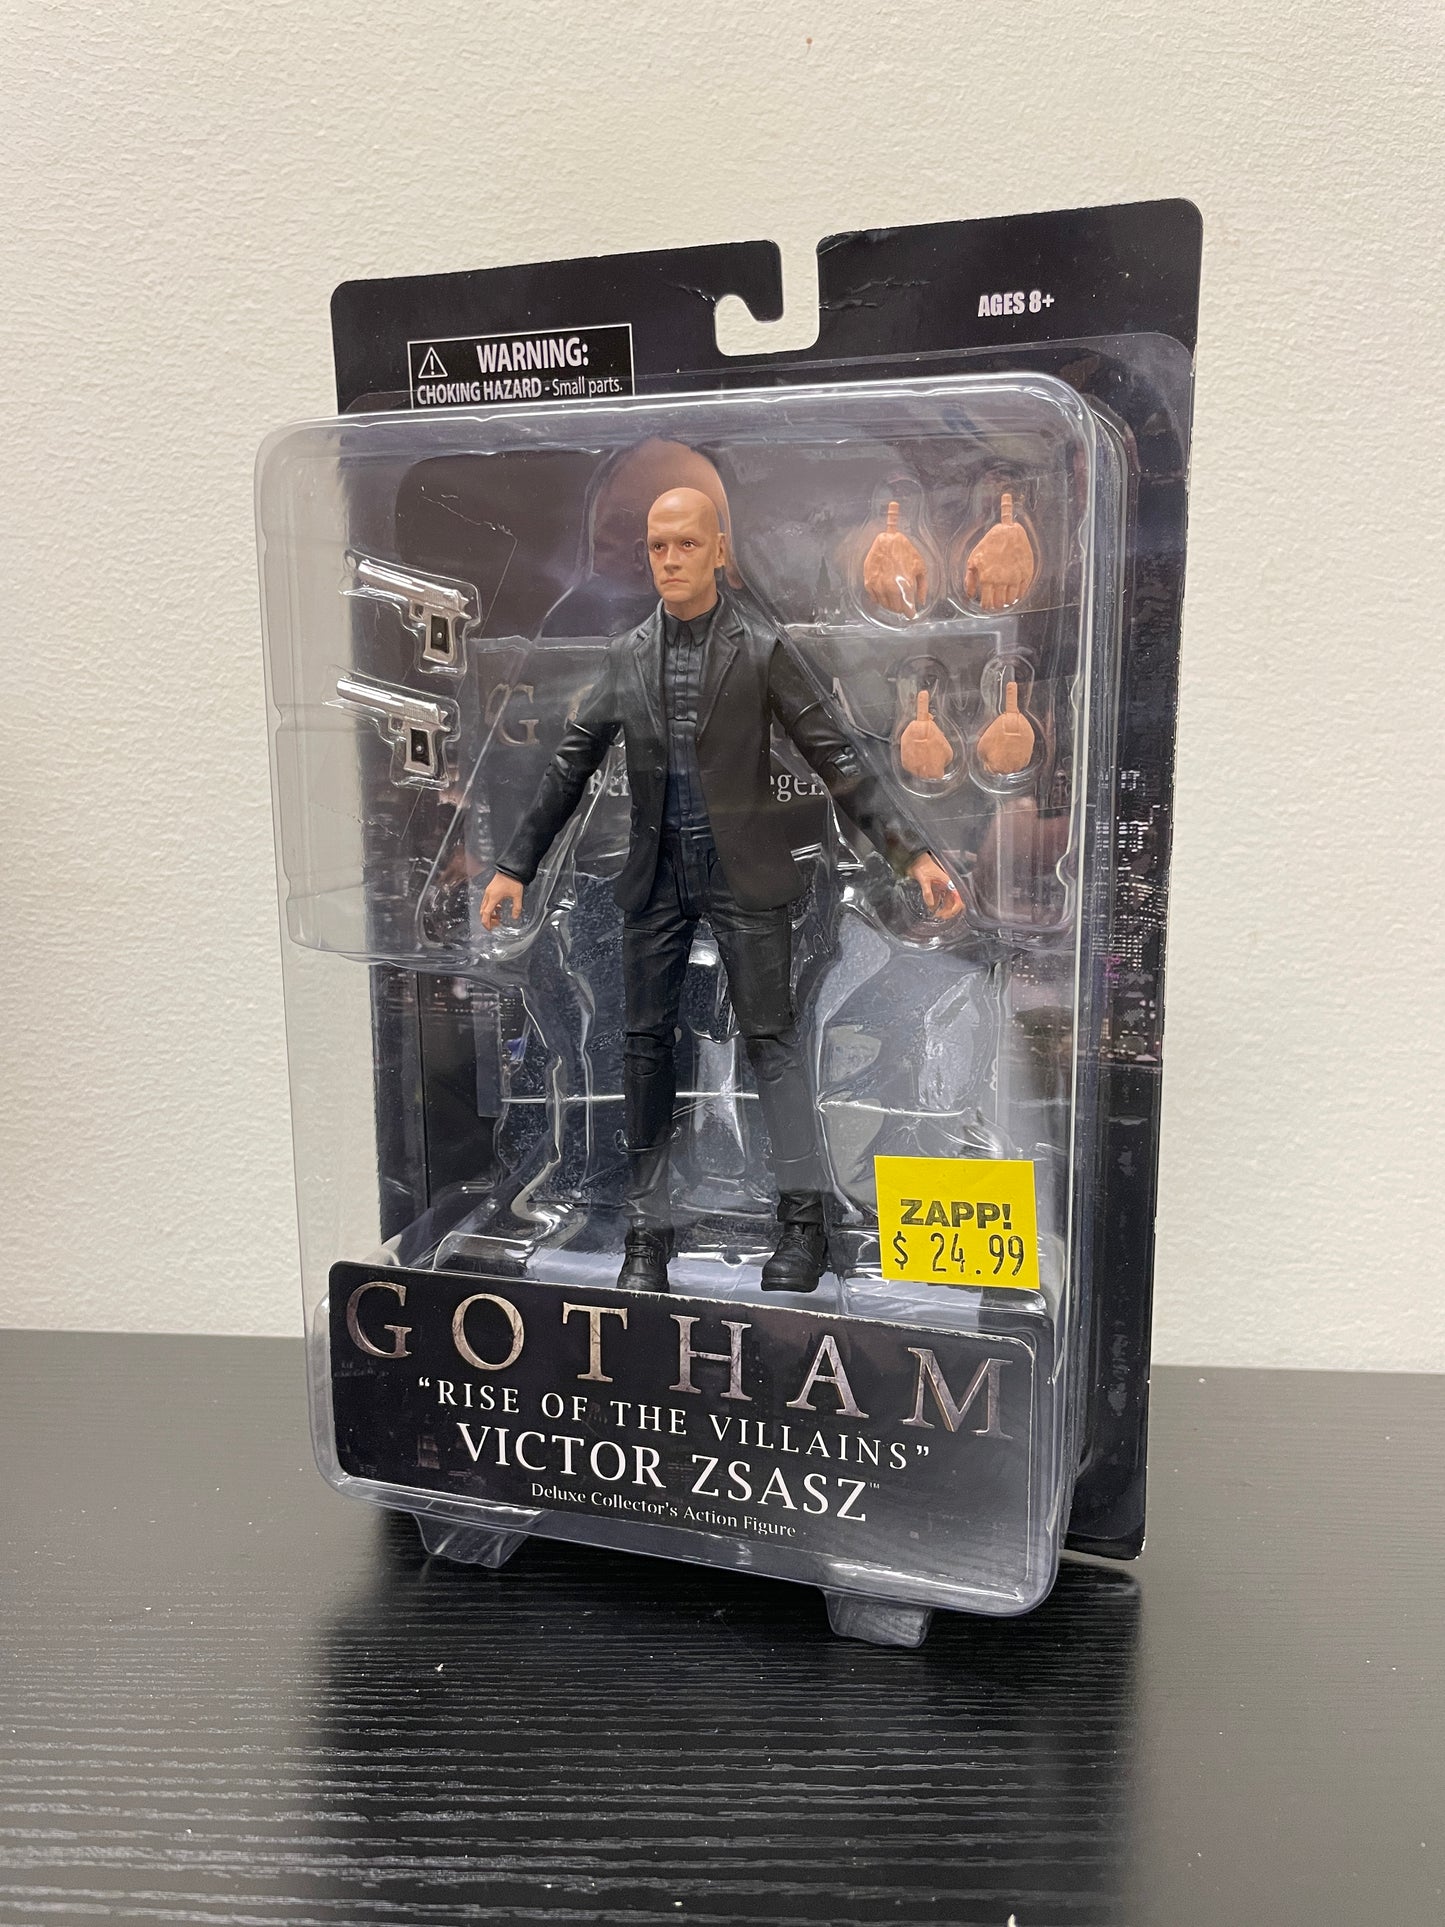 Diamond Select Toys Gotham "Rise of the Villians" Victor Zsasz Deluxe Collector's Figure